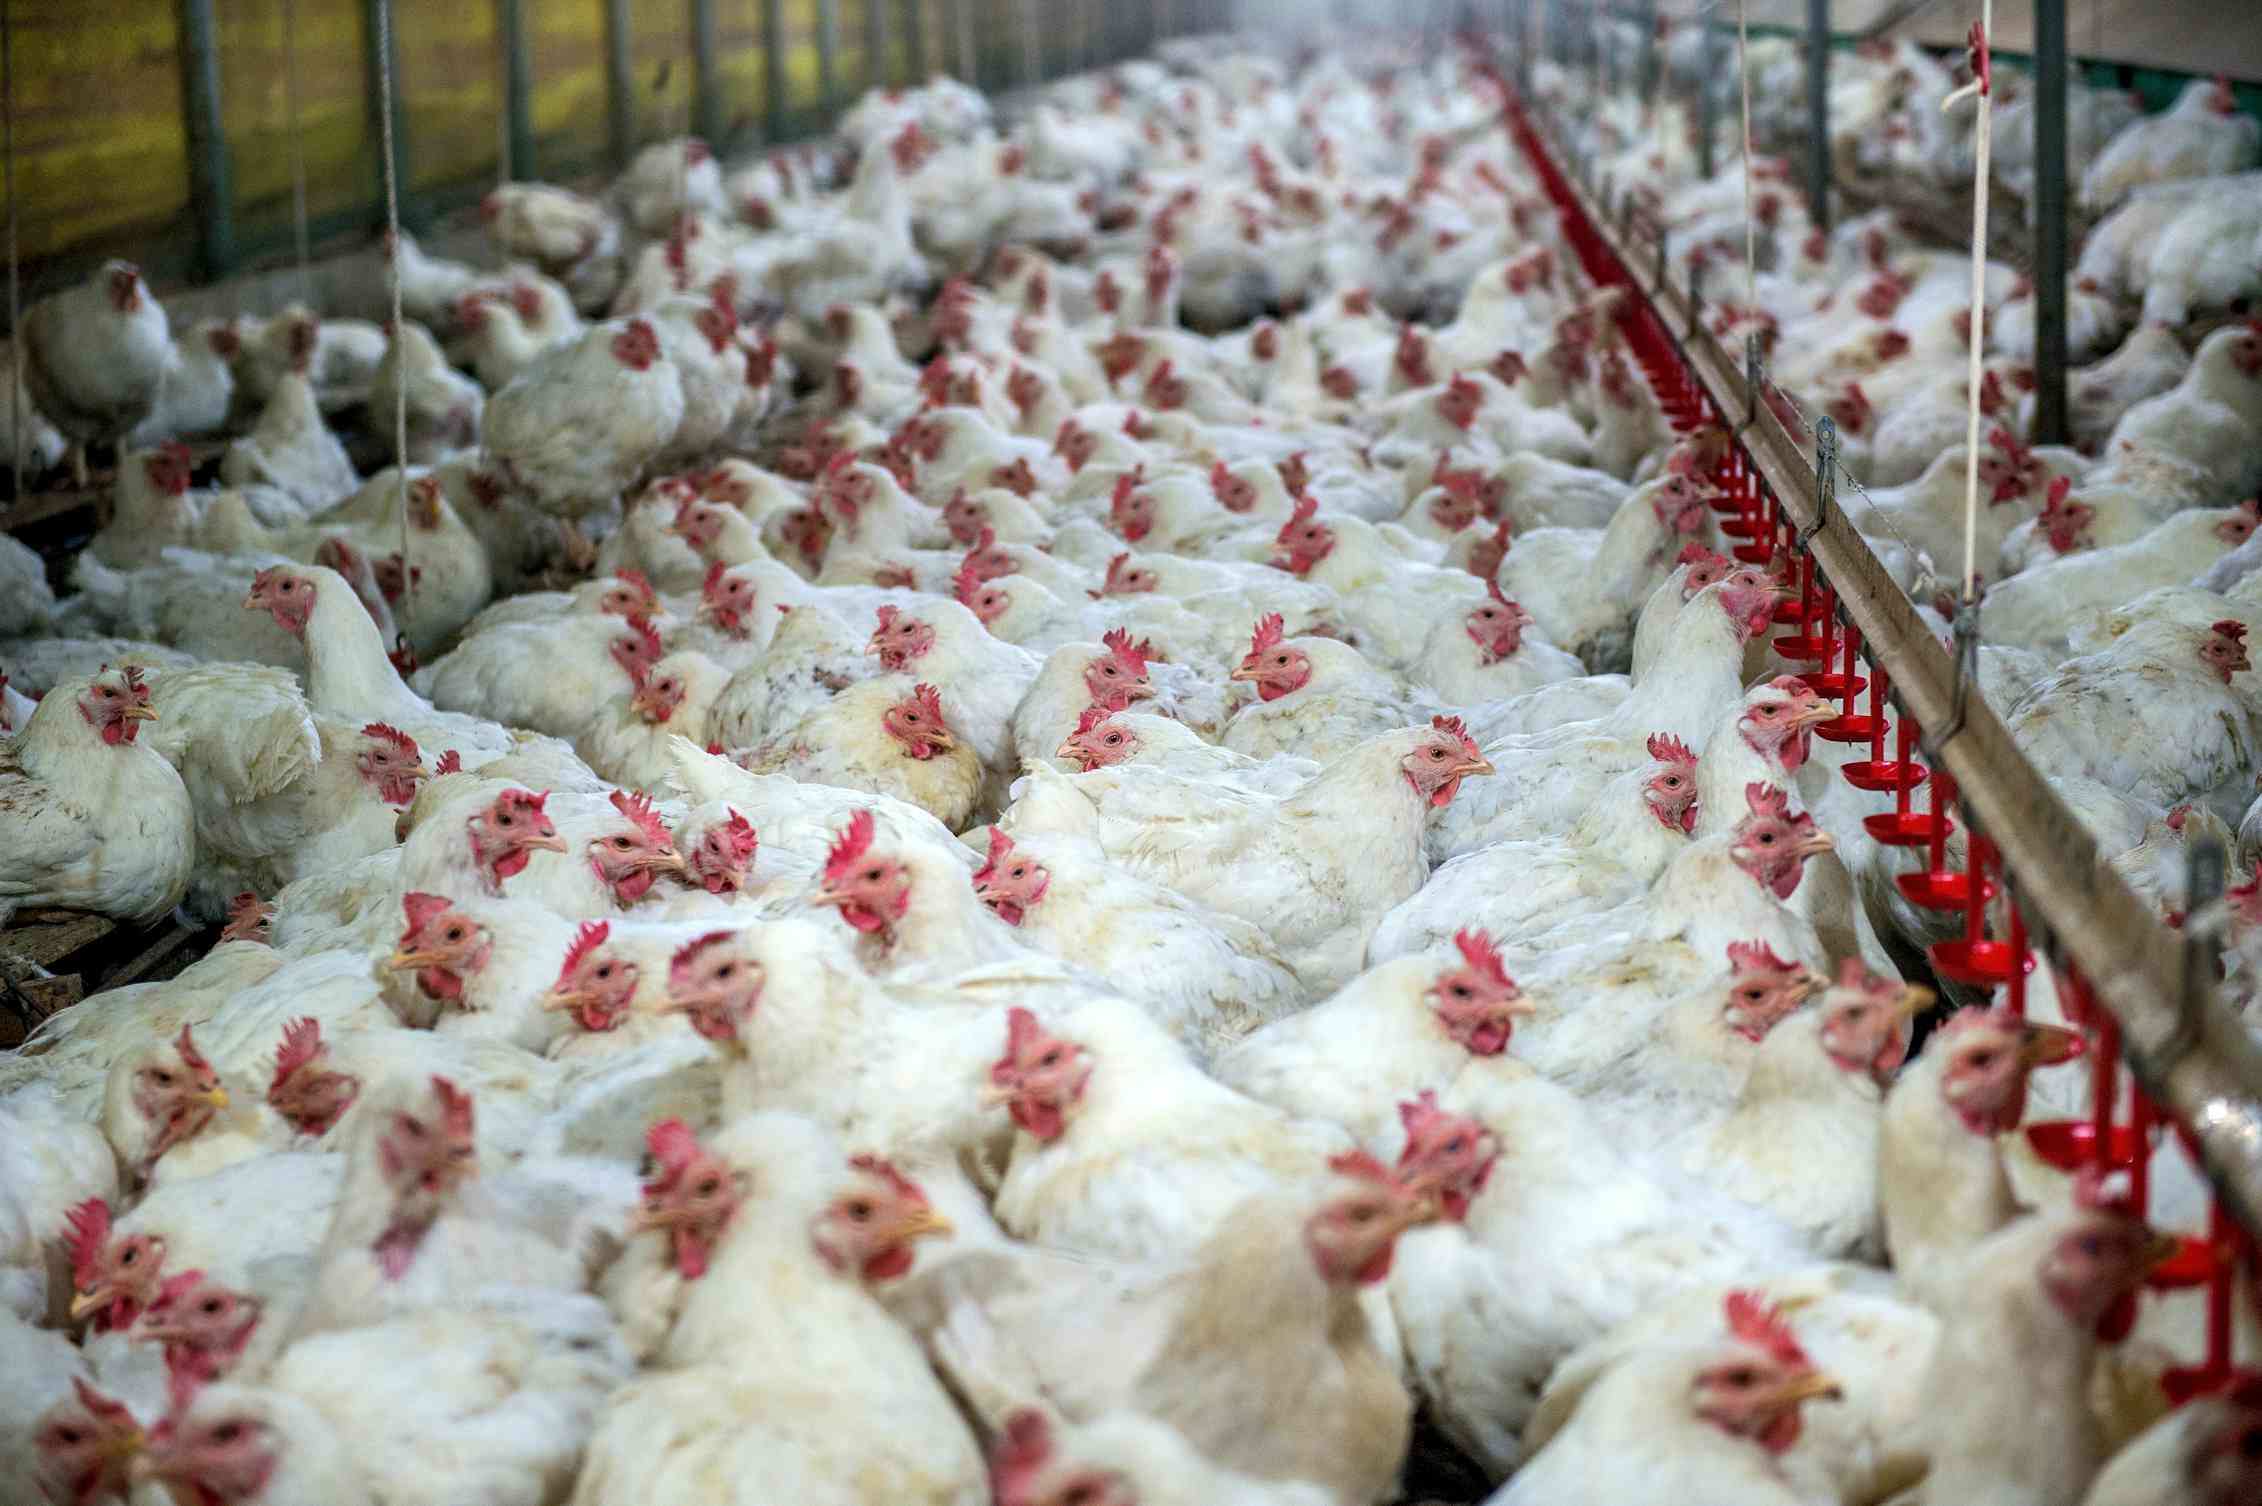 Hundreds of chickens are lumped together in a farm.